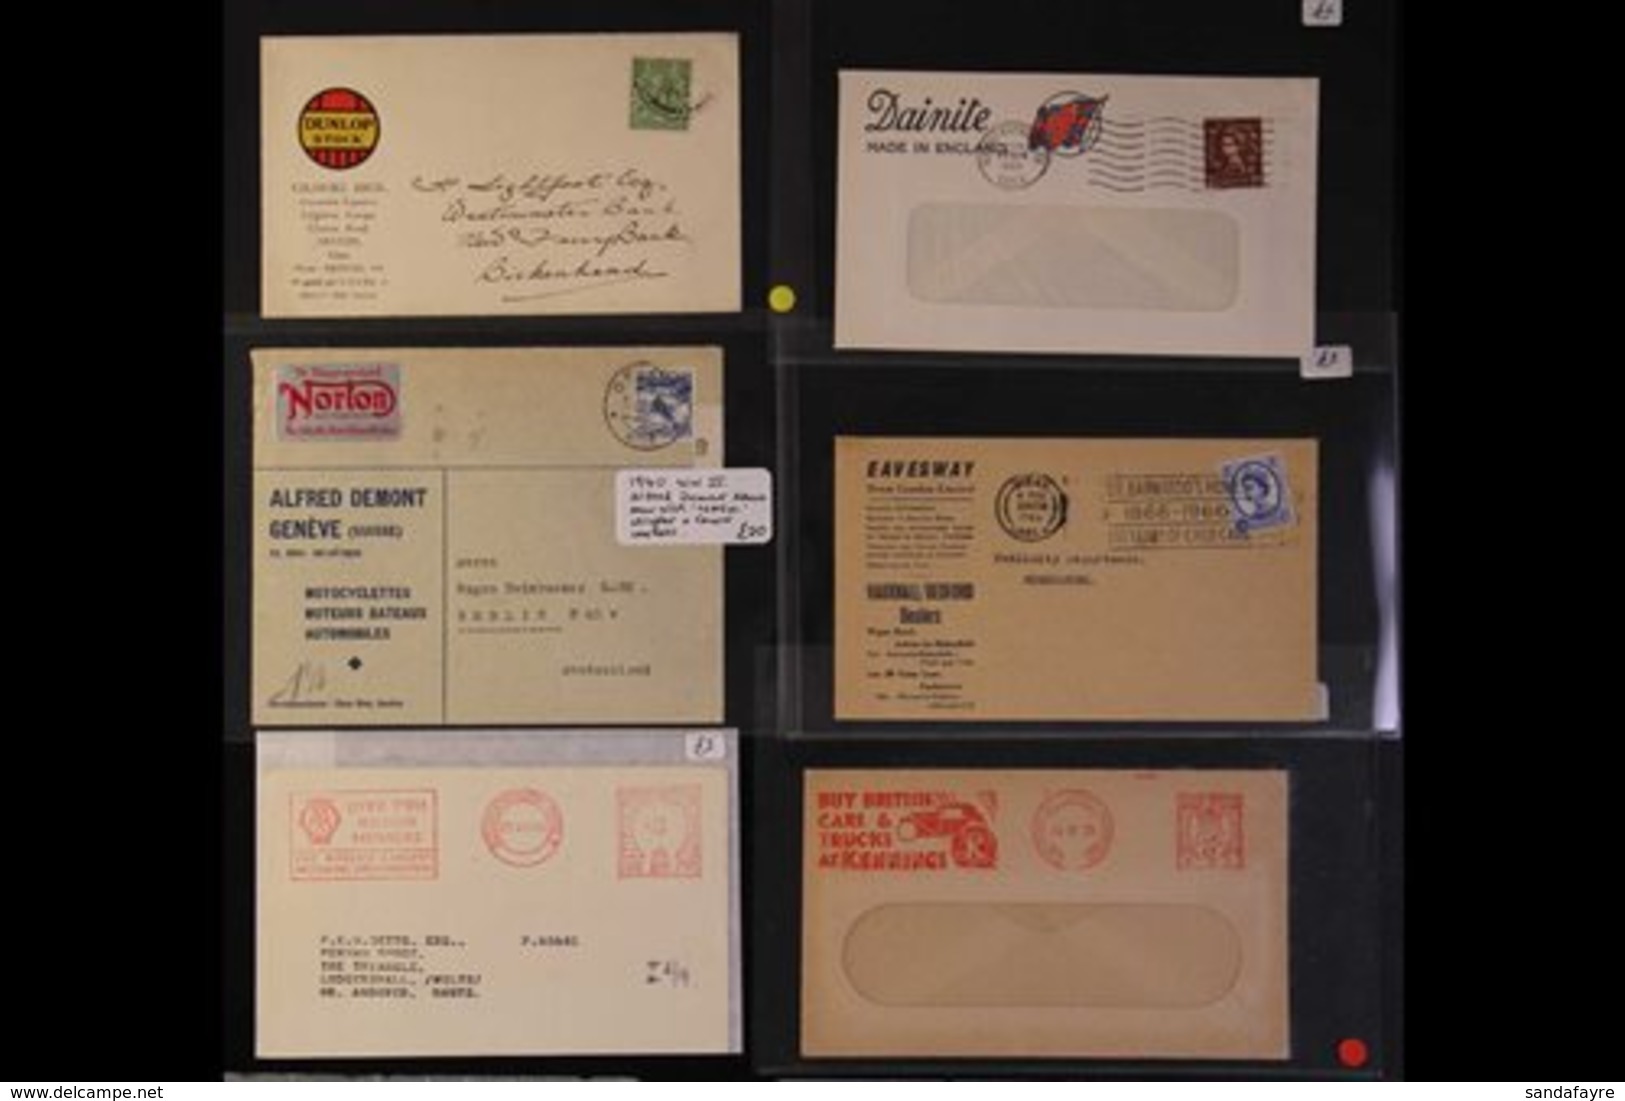 CARS & MOTORING ADVERTISING ENVELOPES & METER MAIL We Note Interesting Group Of Covers, With Advert Envs For Dunlop, Sco - Non Classés